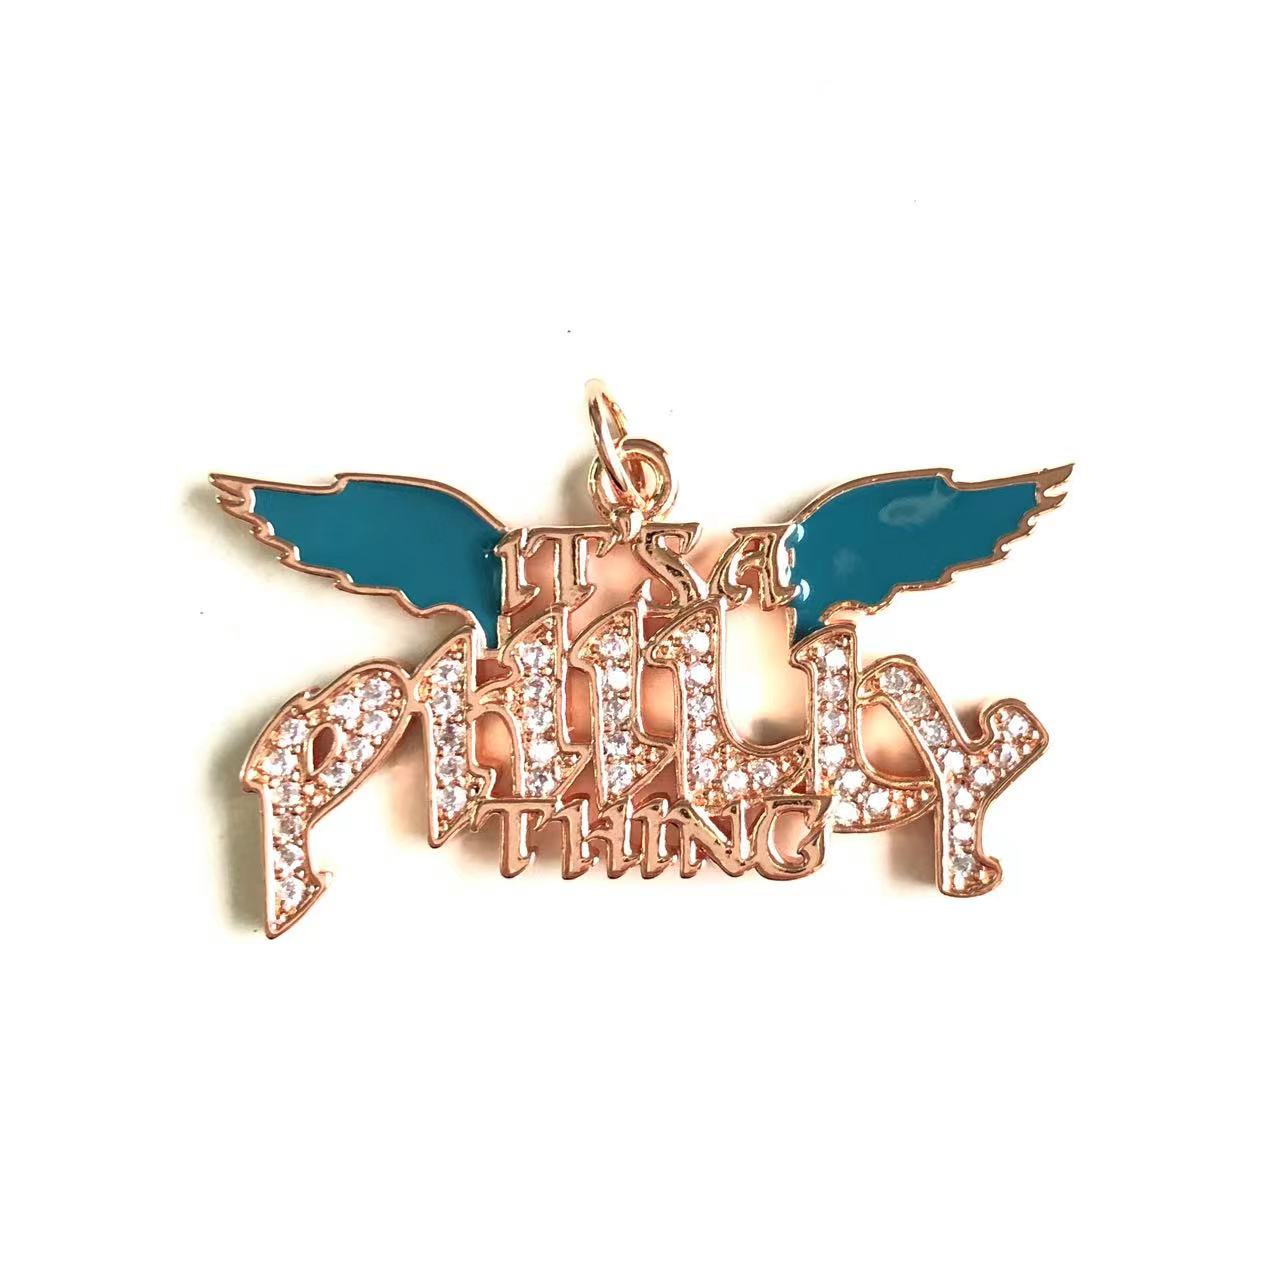 10pcs/lot CZ Paved "It is a Philly Thing" Word Philadelphia Eagles Charms Rose Gold CZ Paved Charms American Football Sports New Charms Arrivals Charms Beads Beyond